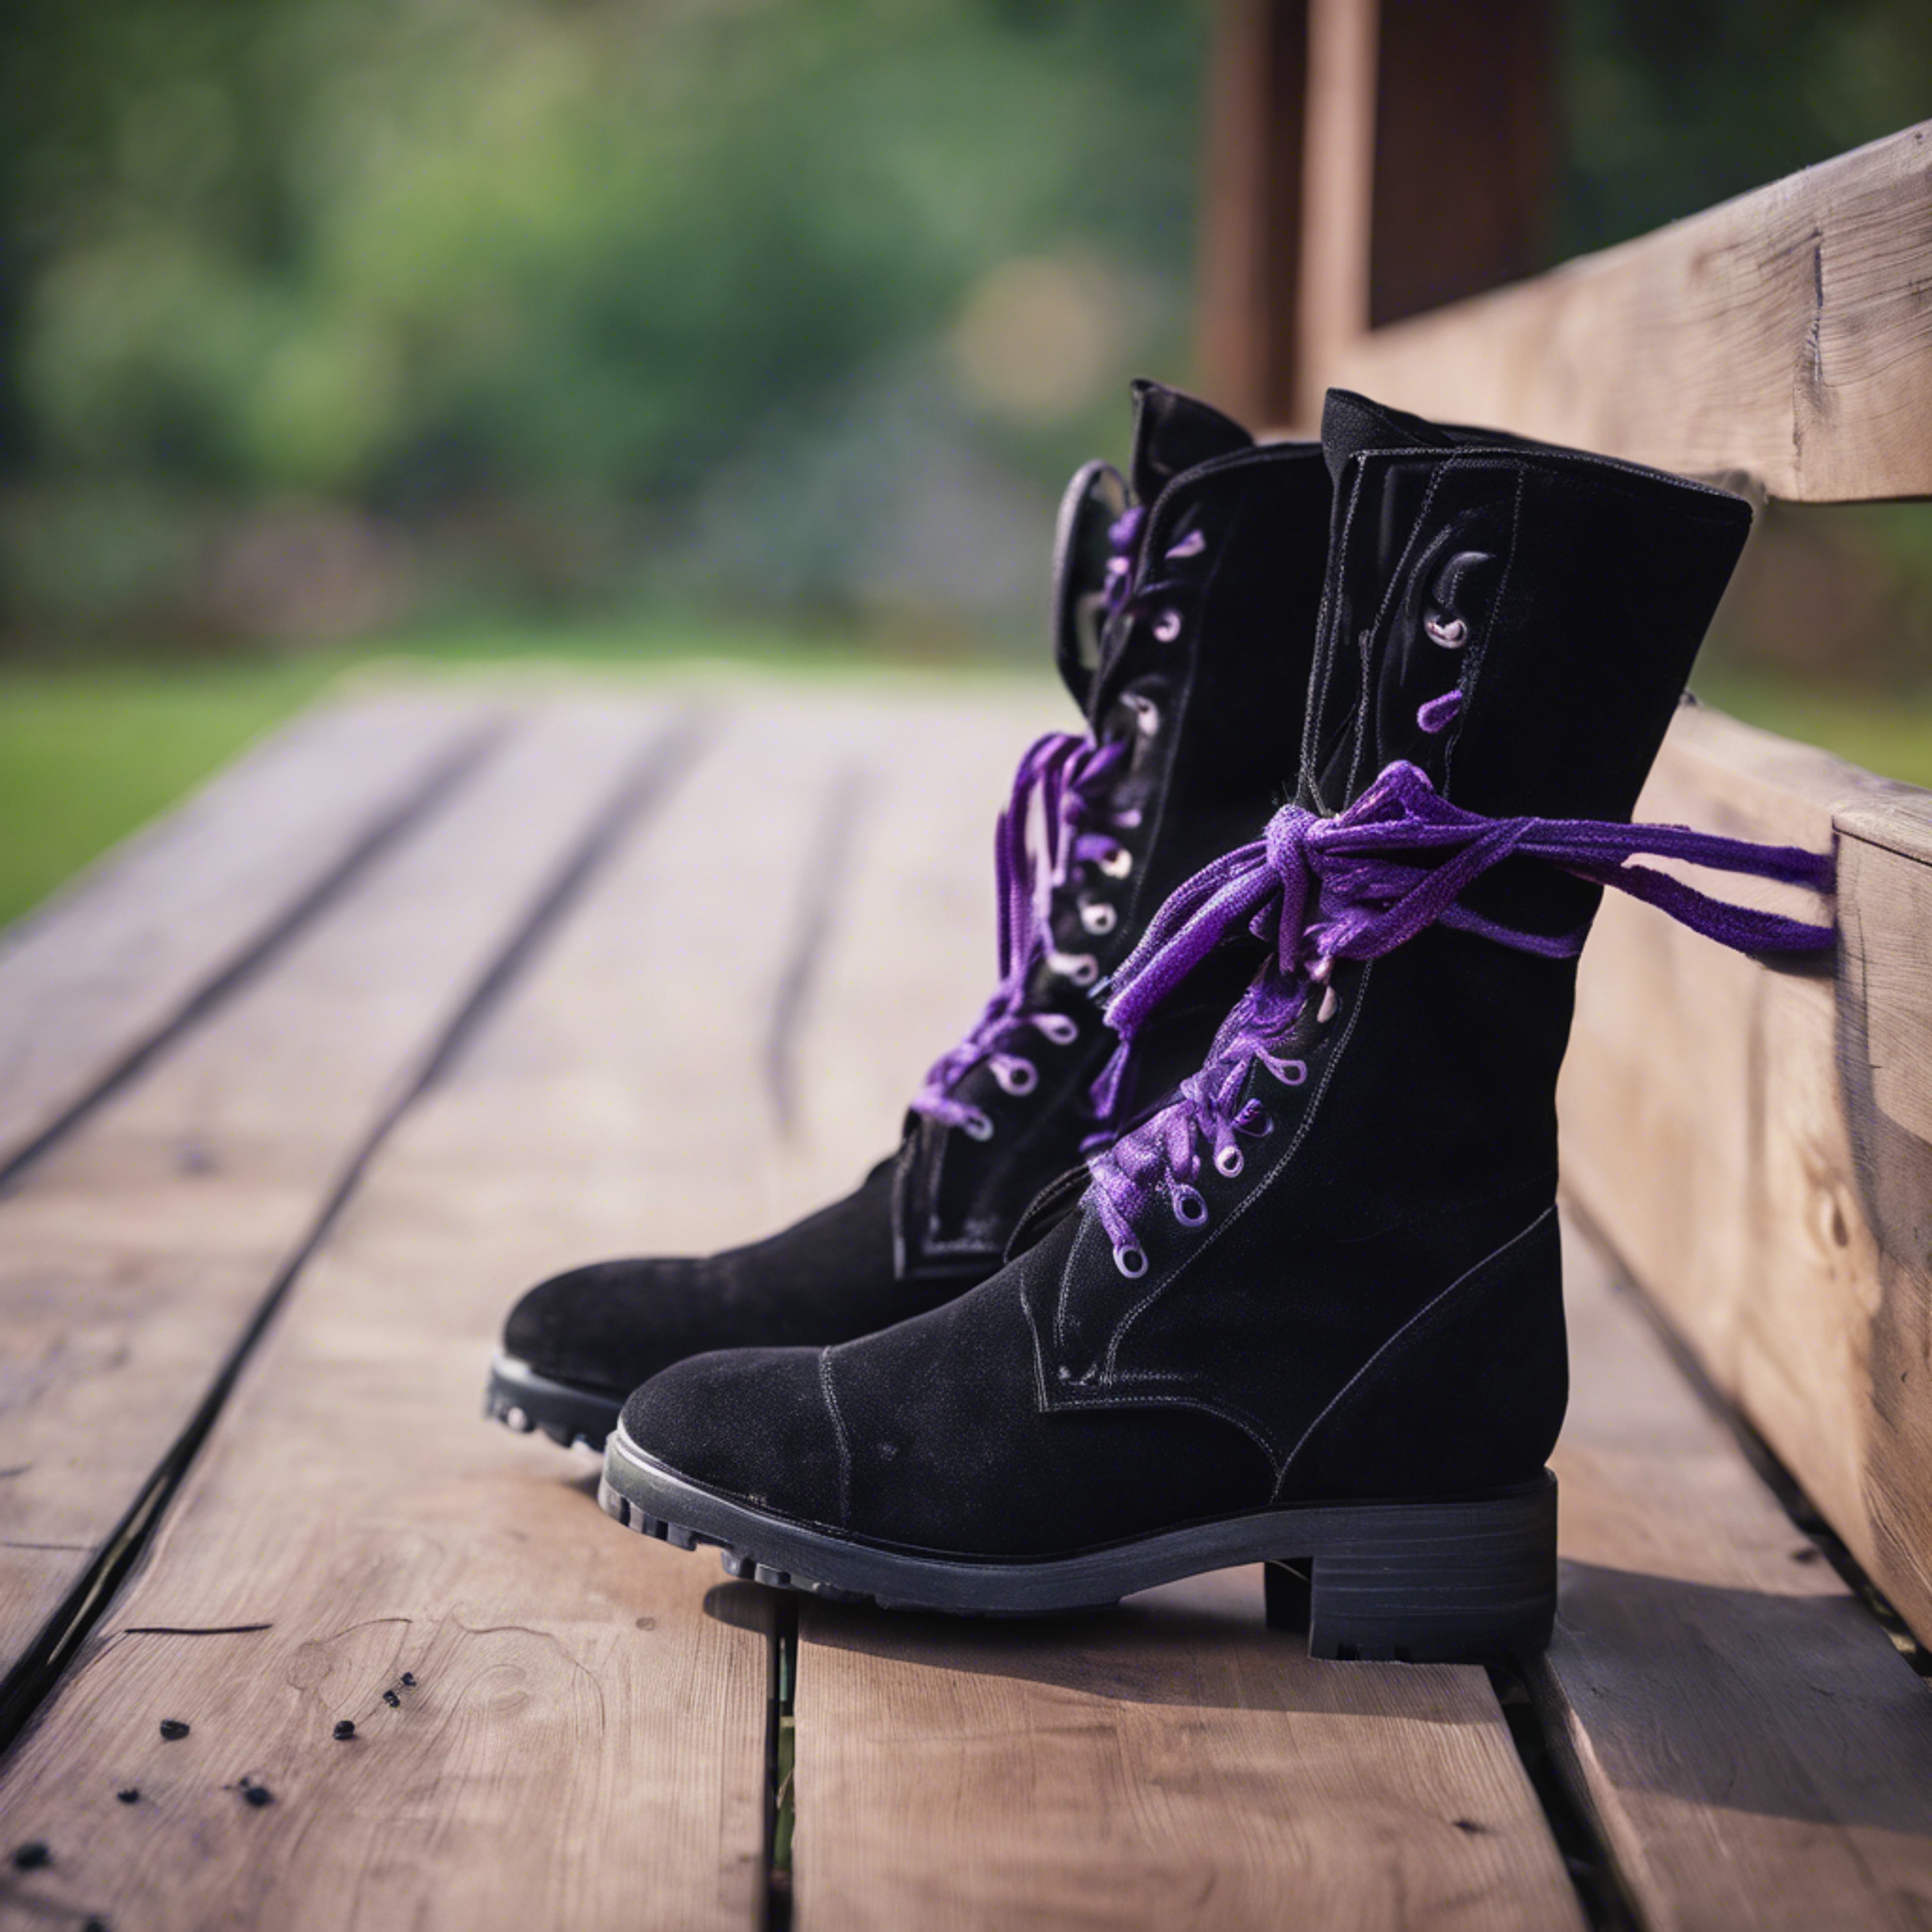 A pair of black suede boots with purple laces left casually on a wooden porch.壁紙[fedd81ee4b6b40088ba0]